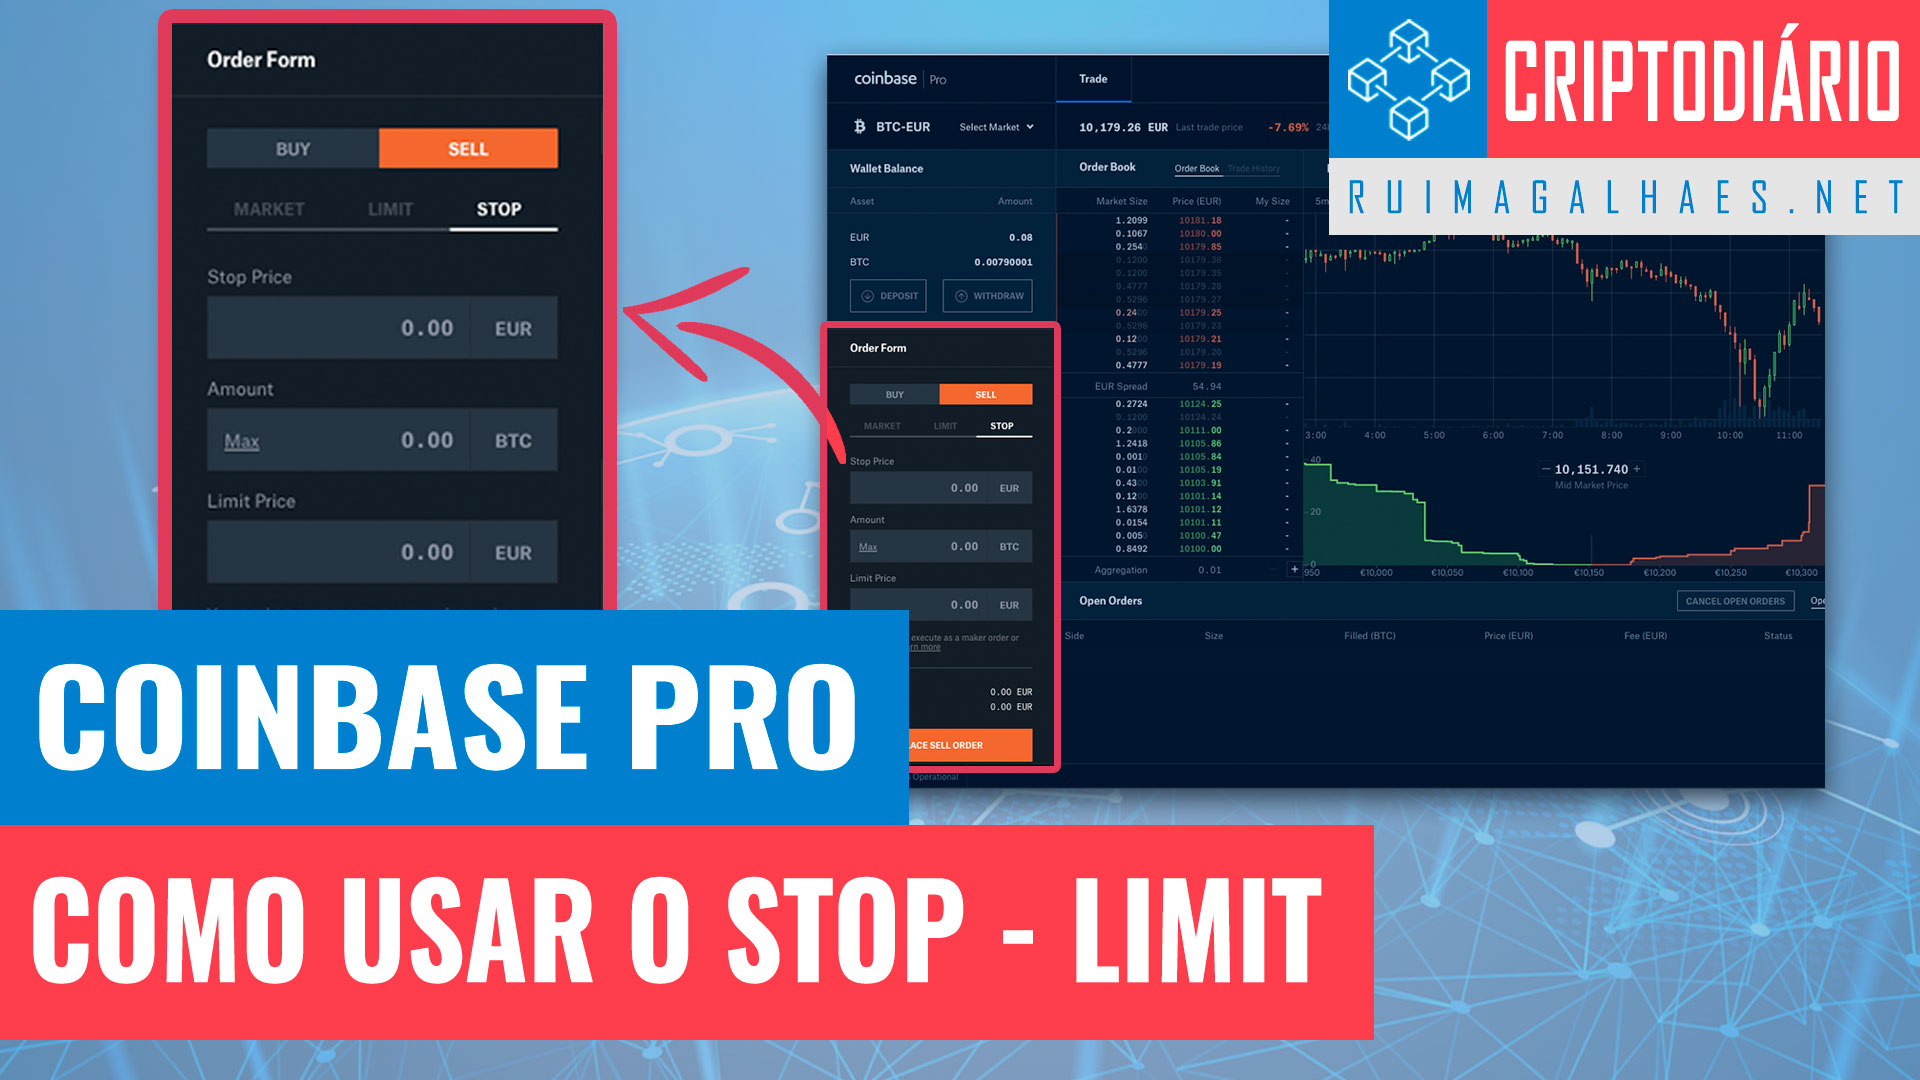 does coinbase allow limit orders